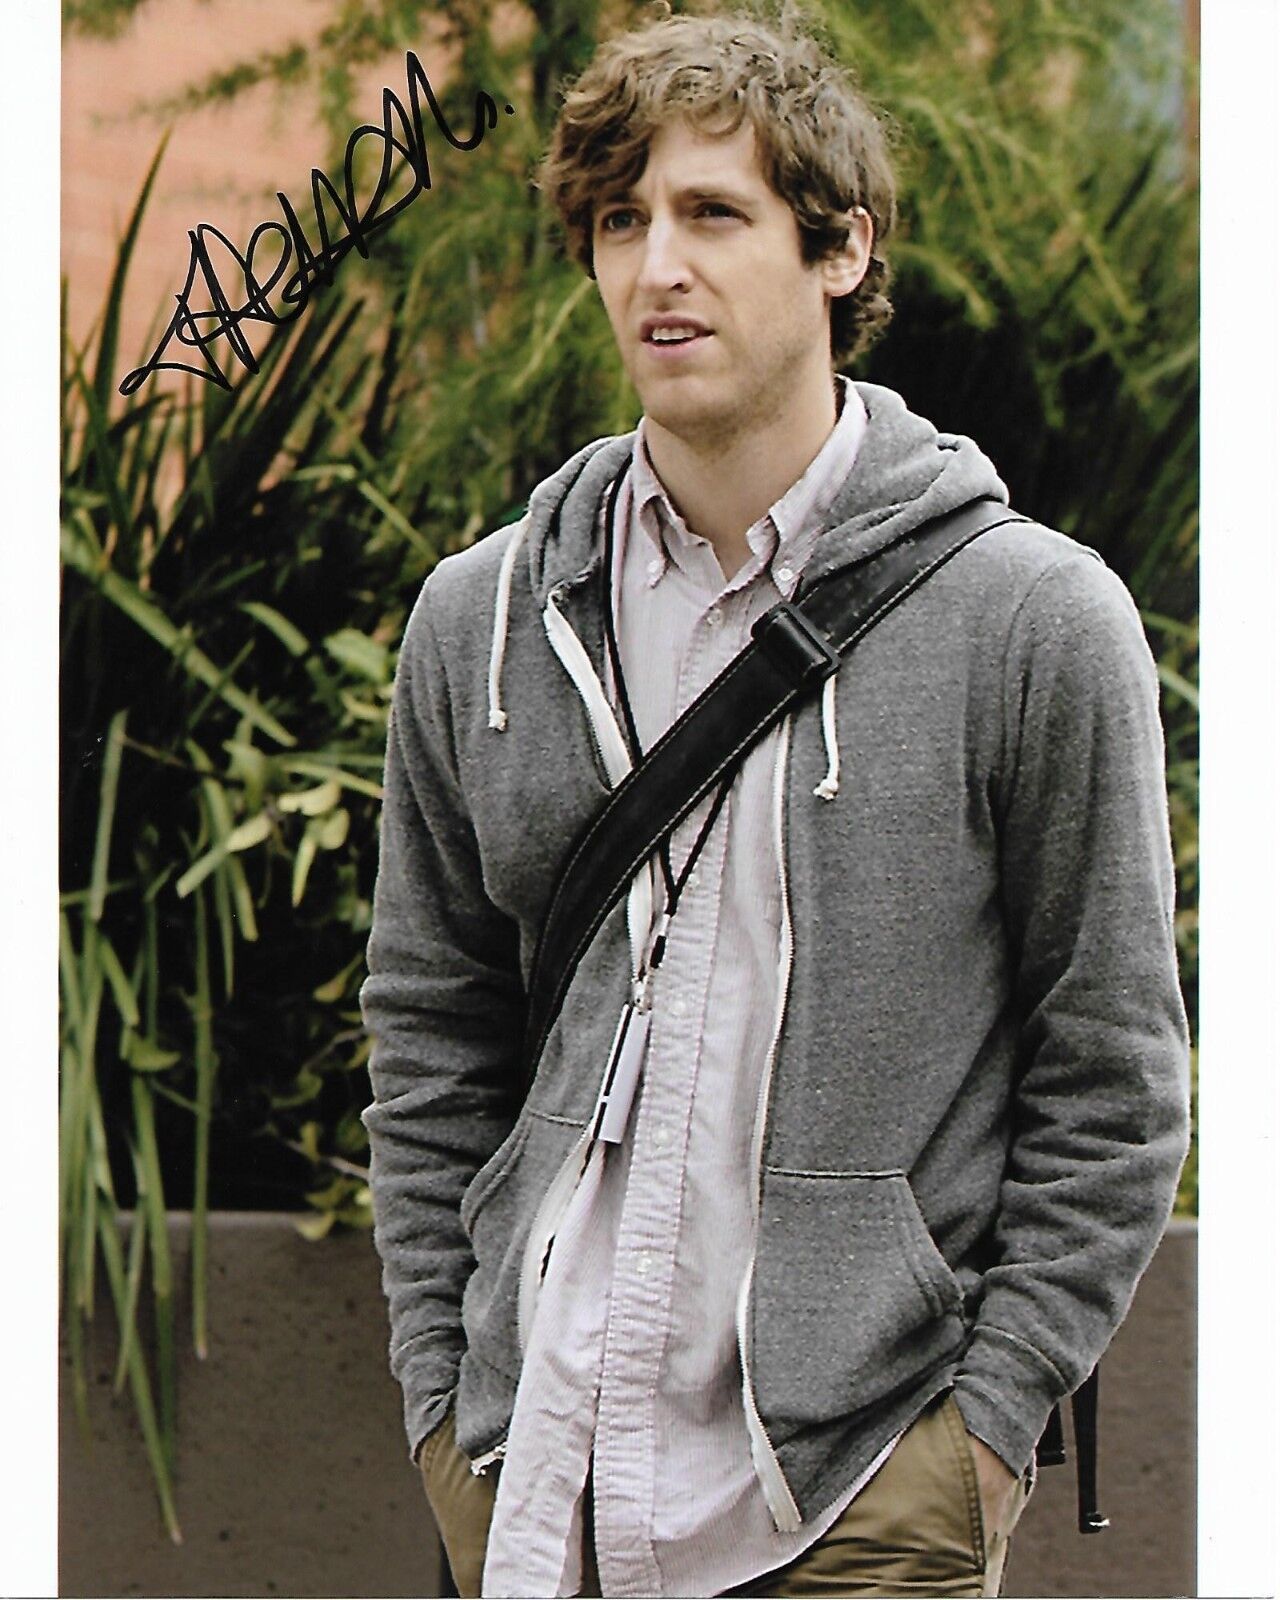 THOMAS MIDDLEDITCH SILICON VALLEY AUTOGRAPHED Photo Poster painting SIGNED 8X10 #4 RICHARD